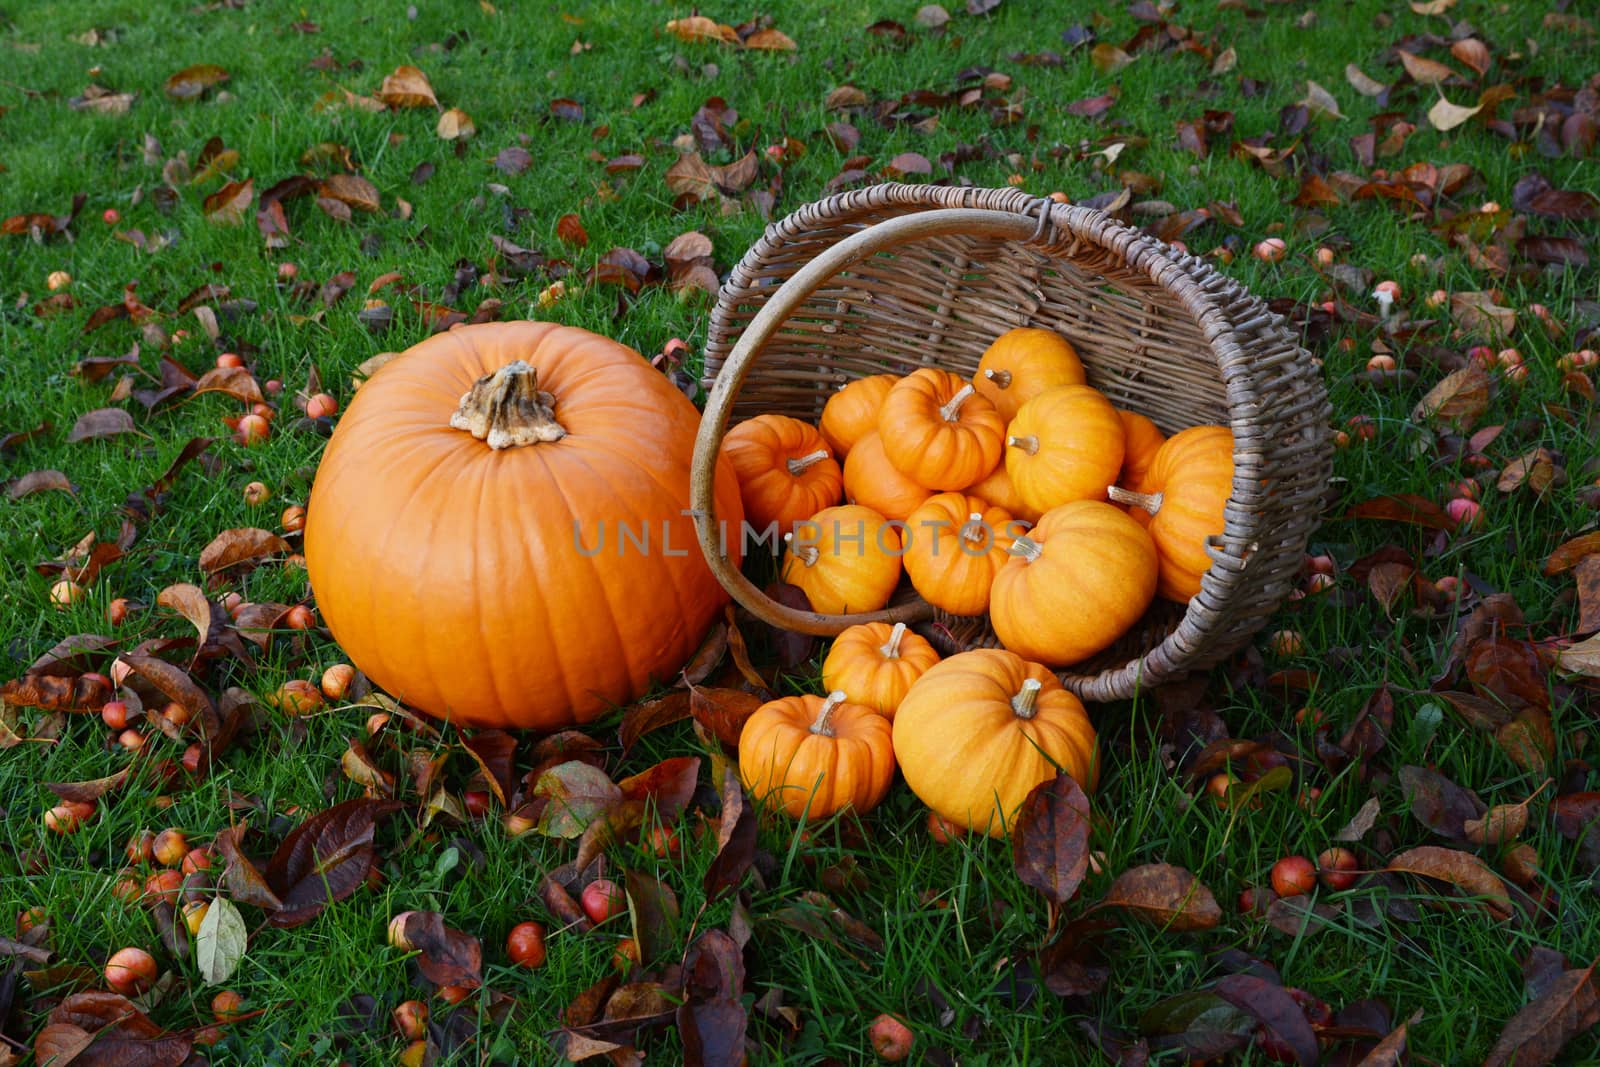 Large pumpkin and a basket full of mini pumpkins spilling onto a lawn covered in crab apples and fall foliage